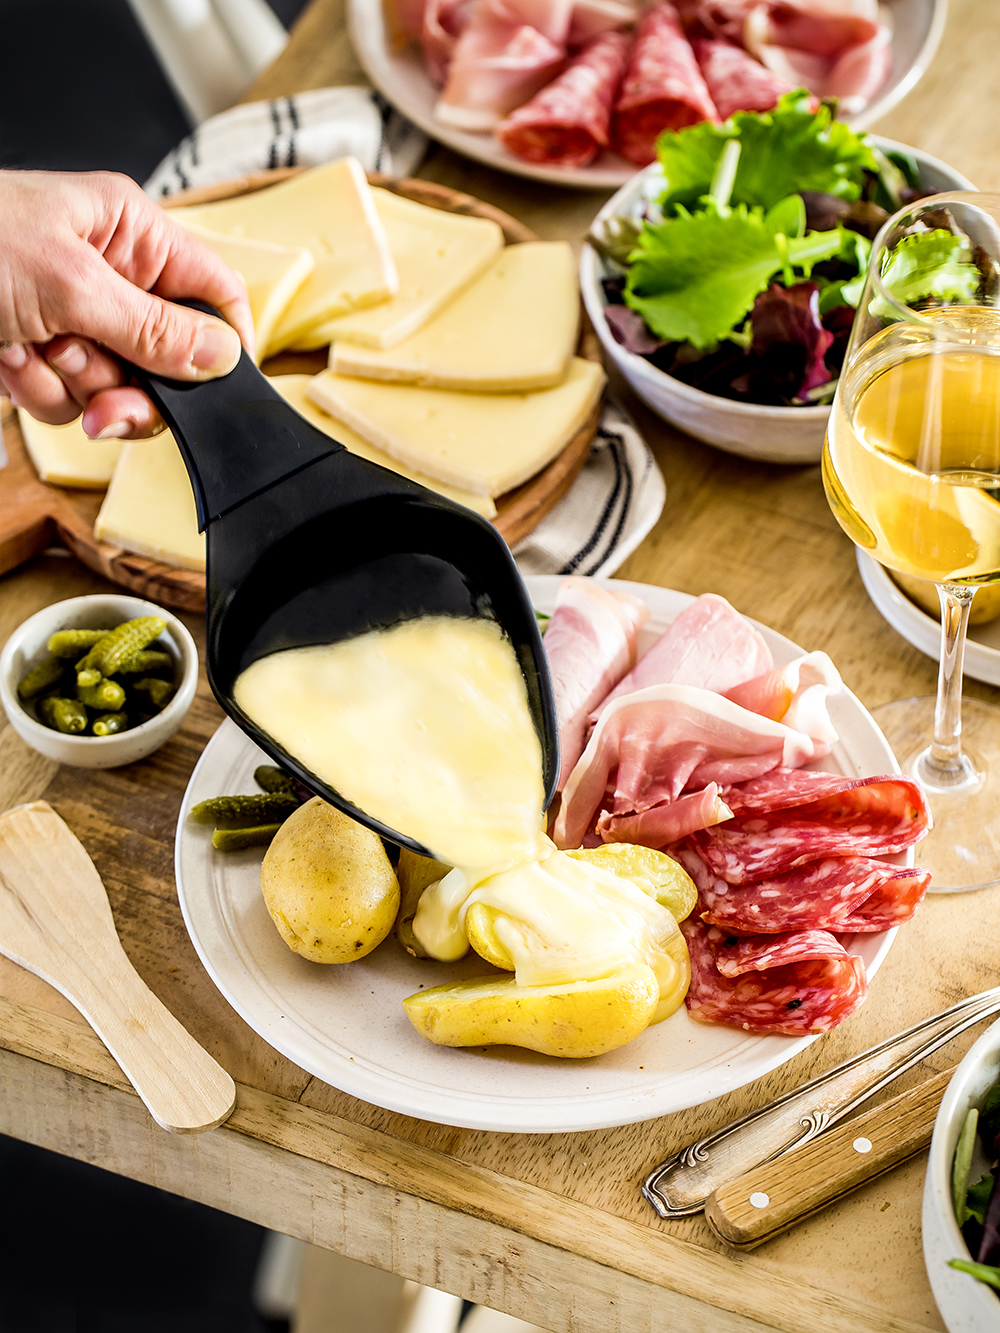 Fromage Raclette et fromage pour raclette - Ermitage